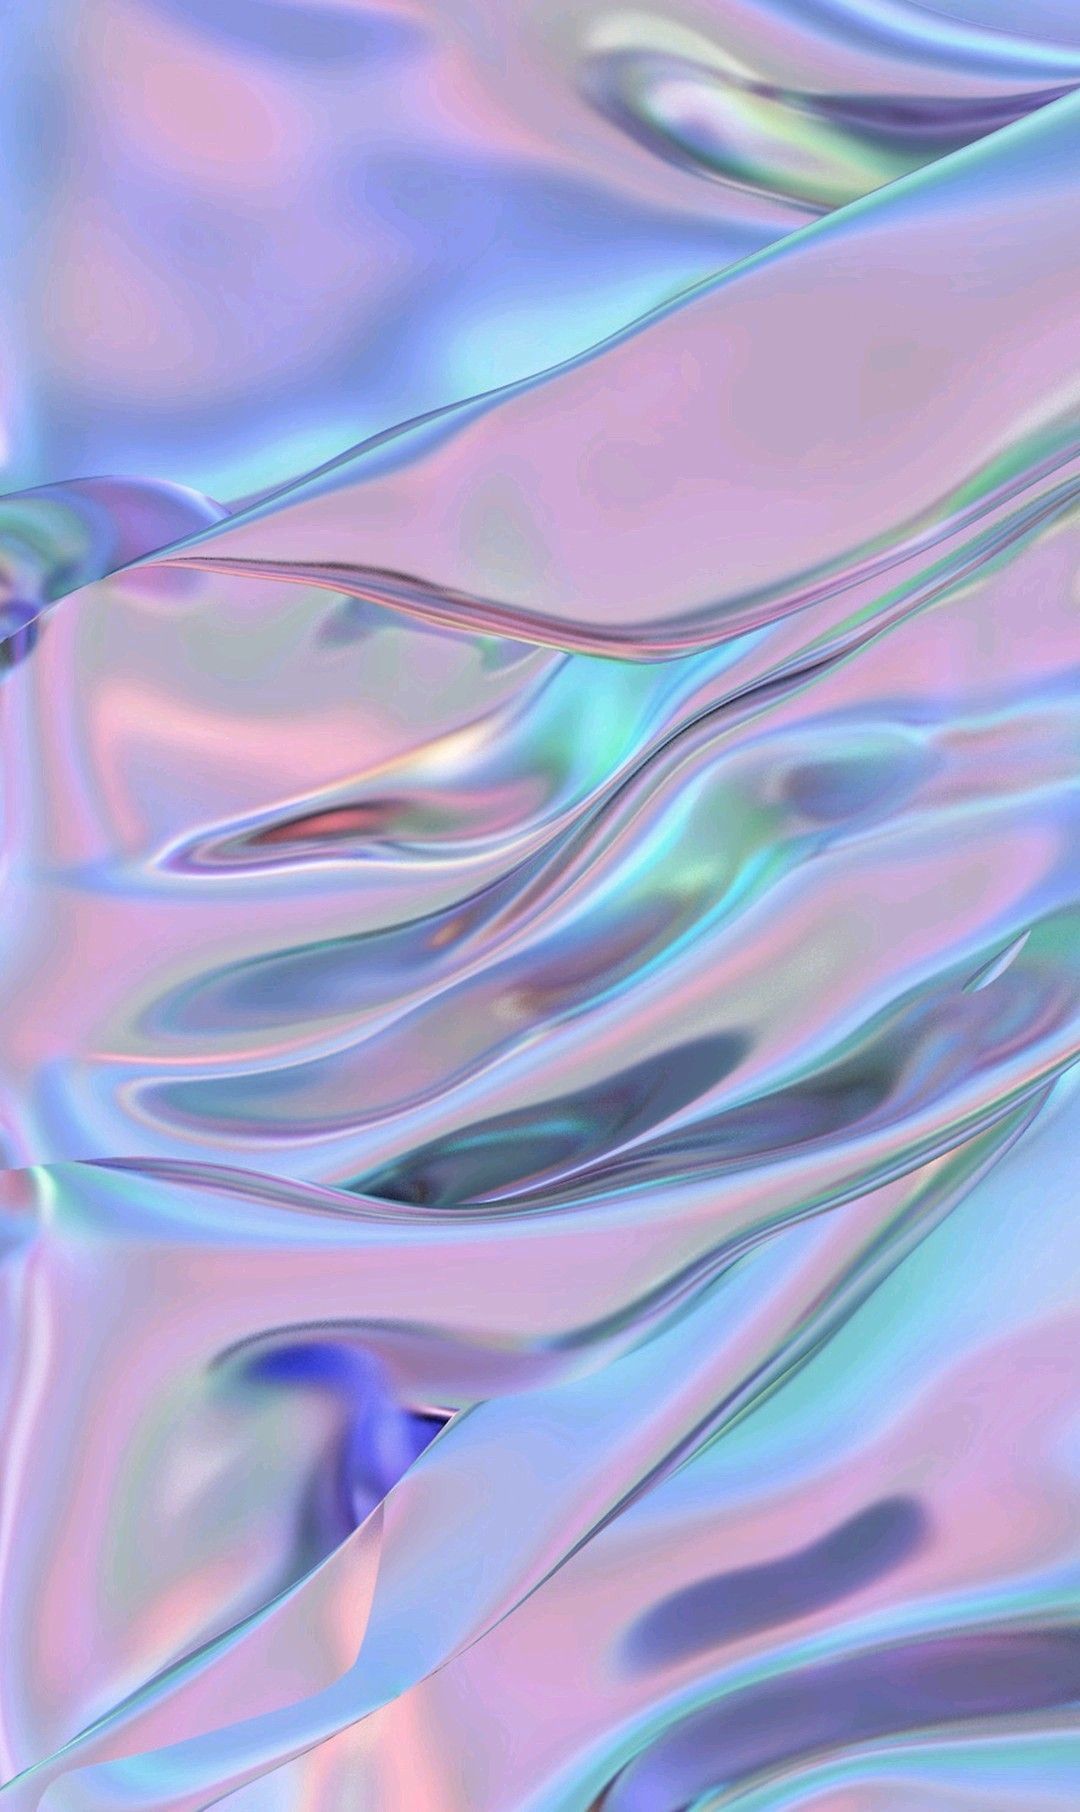 holographic hologram Image by a e s t h e t i c. Holographic wallpaper, Blog wallpaper, Galaxy wallpaper